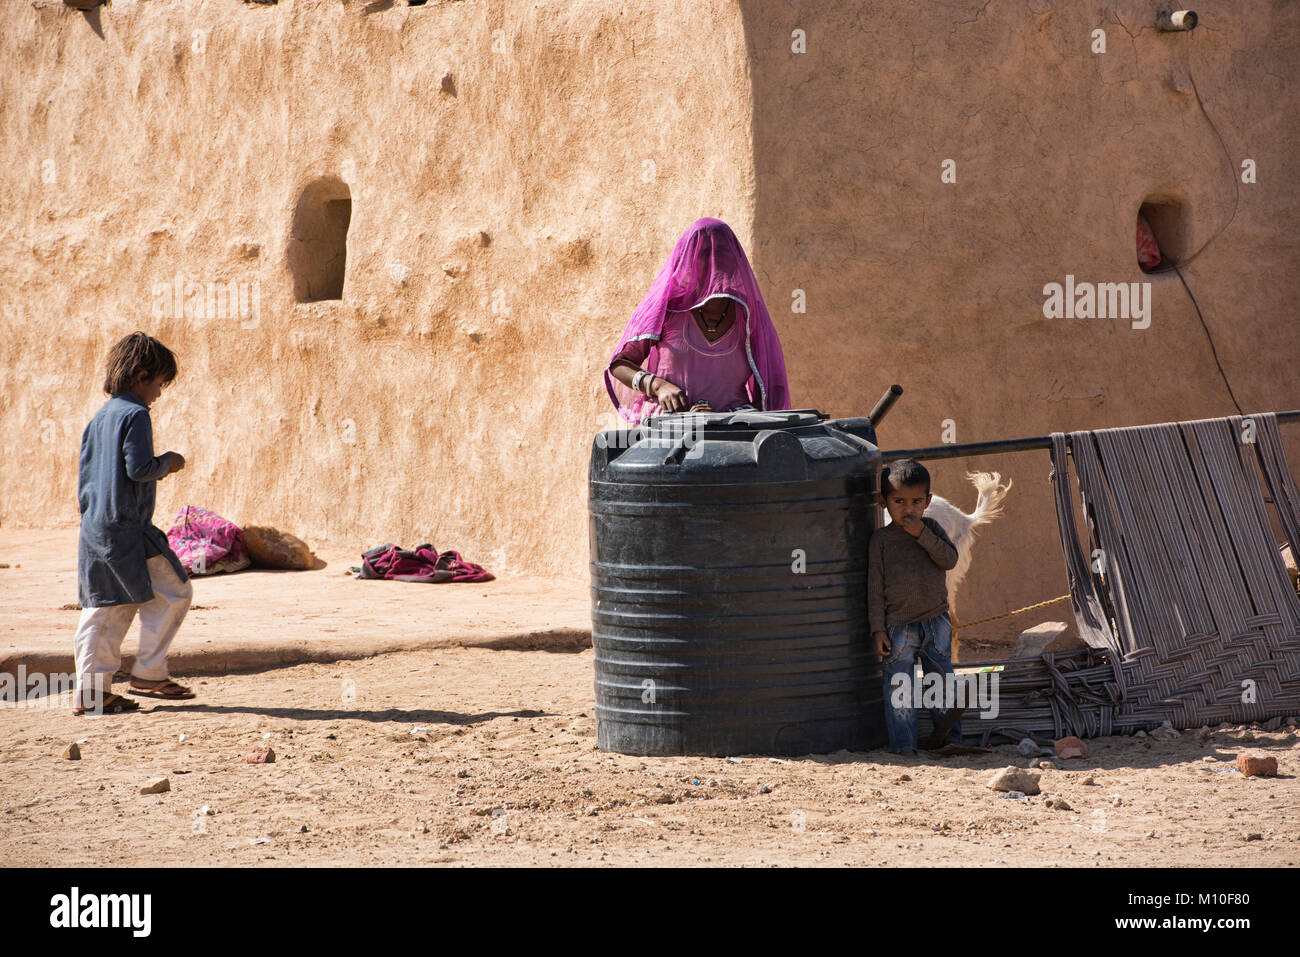 Woman in a rural community in the Thar Desert, Rajasthan, India Stock Photo